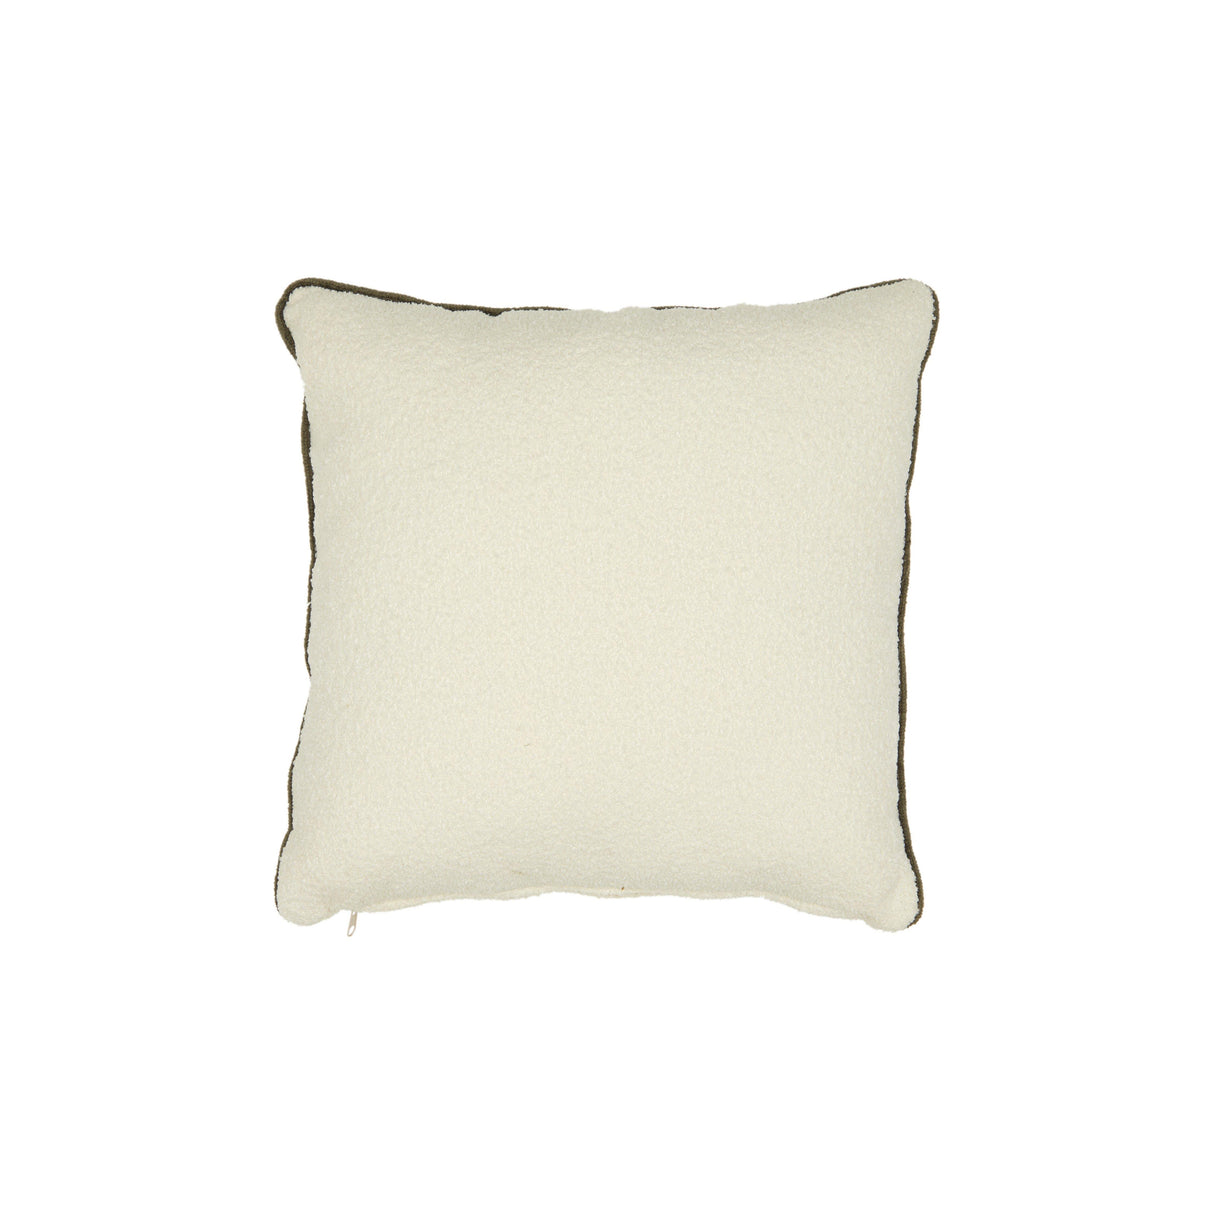 White Teddy Throw Pillow with Green Piping